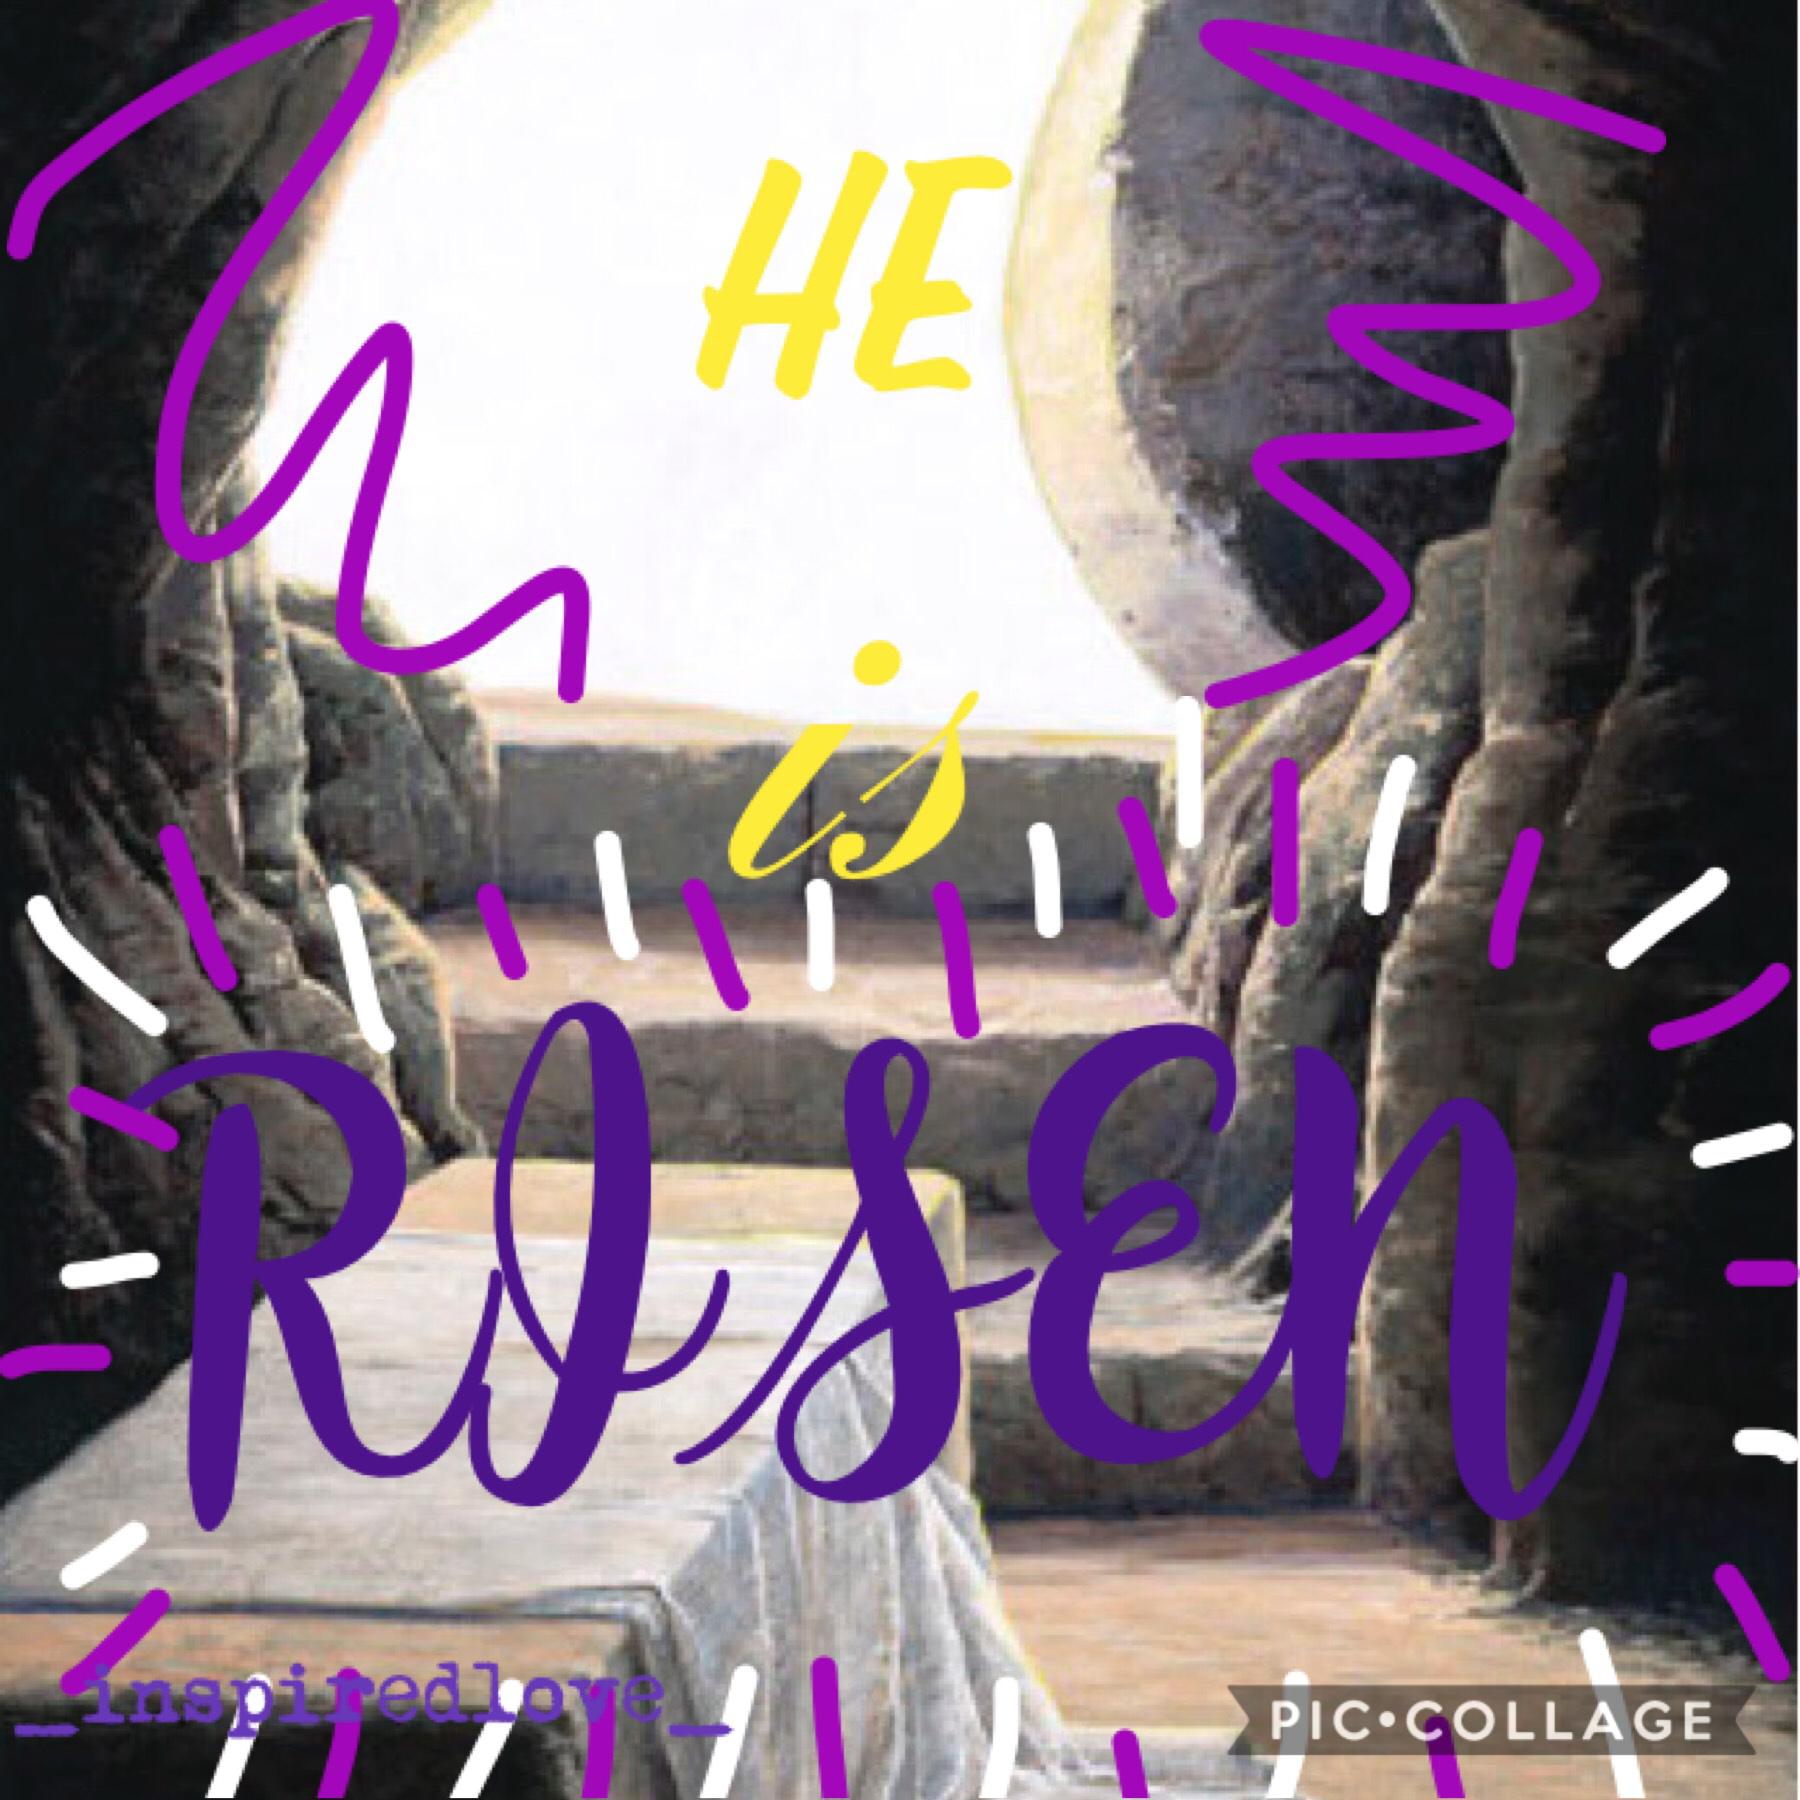 HAPPY EASTER!!  JESUS IS ALIVE! he has risen from from the grave and he has saved us all. i just wanna say, thank you Jesus. have a good day/night 💖⛪️🙏🏻